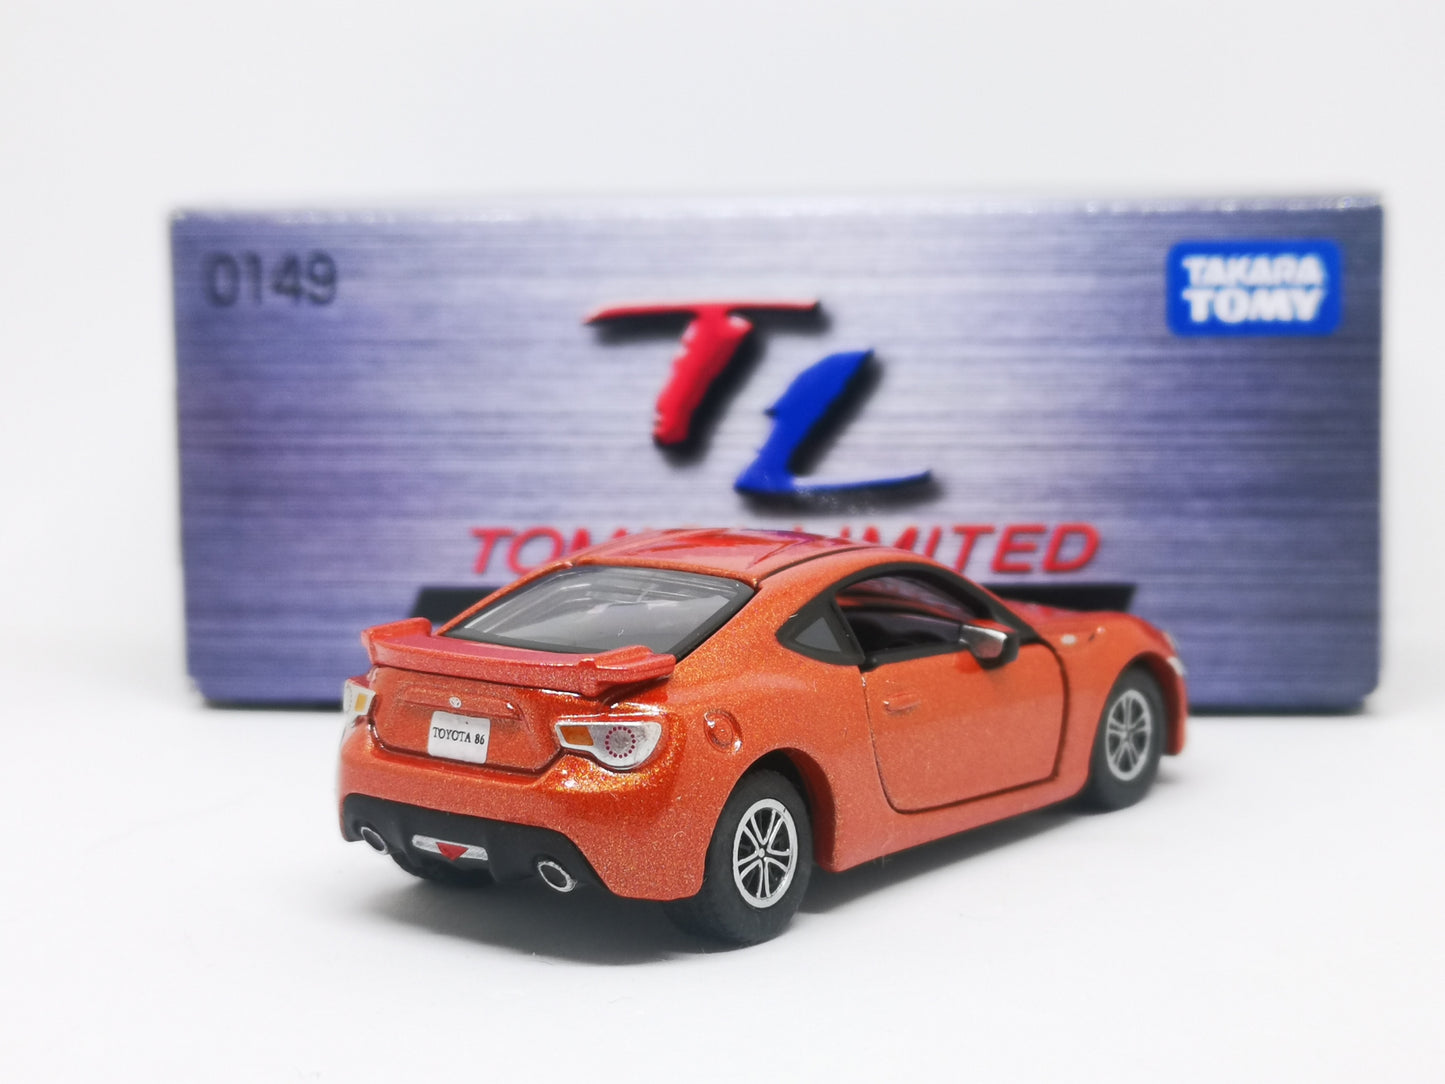 Tomica Limited No.149 Toyota 86